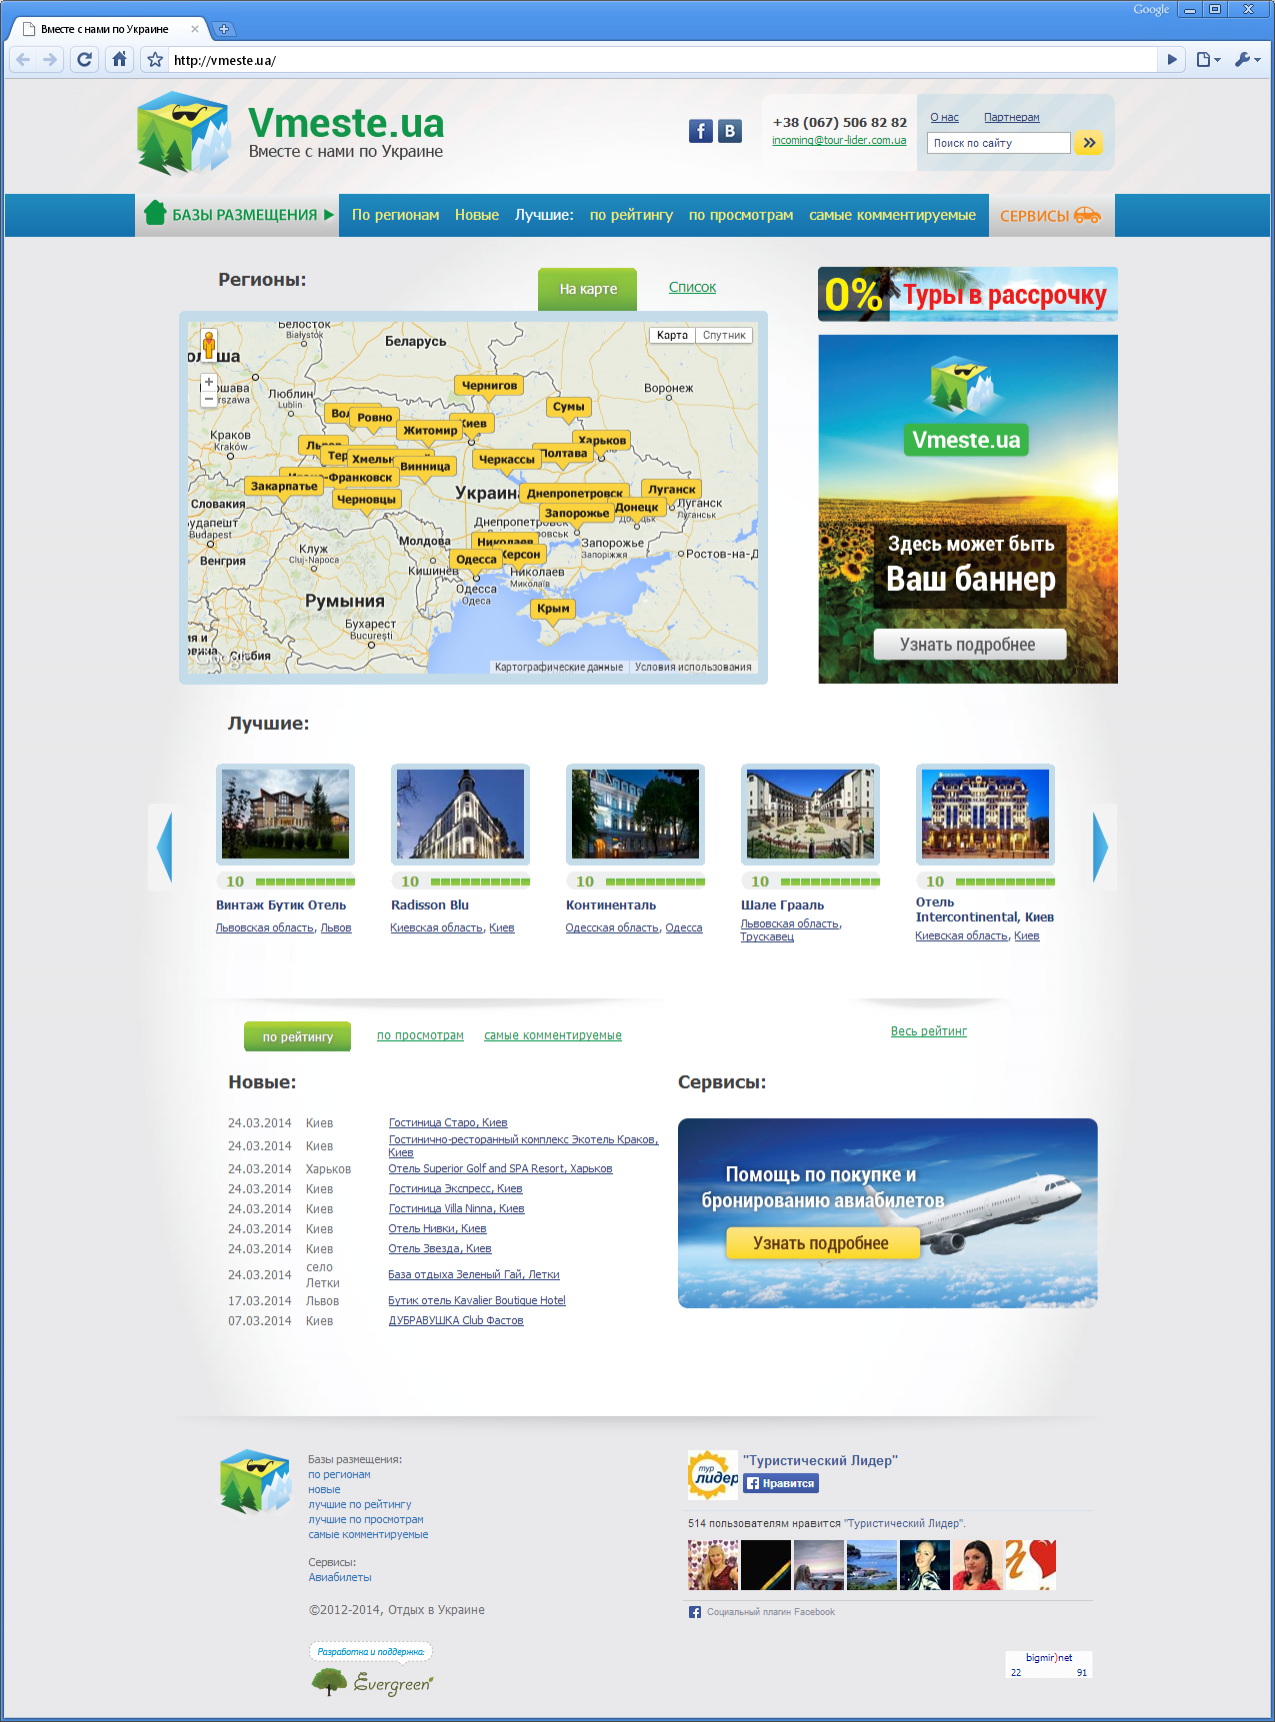 Vmeste.ua conceived as a portal where you can find and see any hotel in Ukraine, and order a number of services, from booking accommodation to tours in different regions of Ukraine. | Evergreen projects | Evergreen projects 9